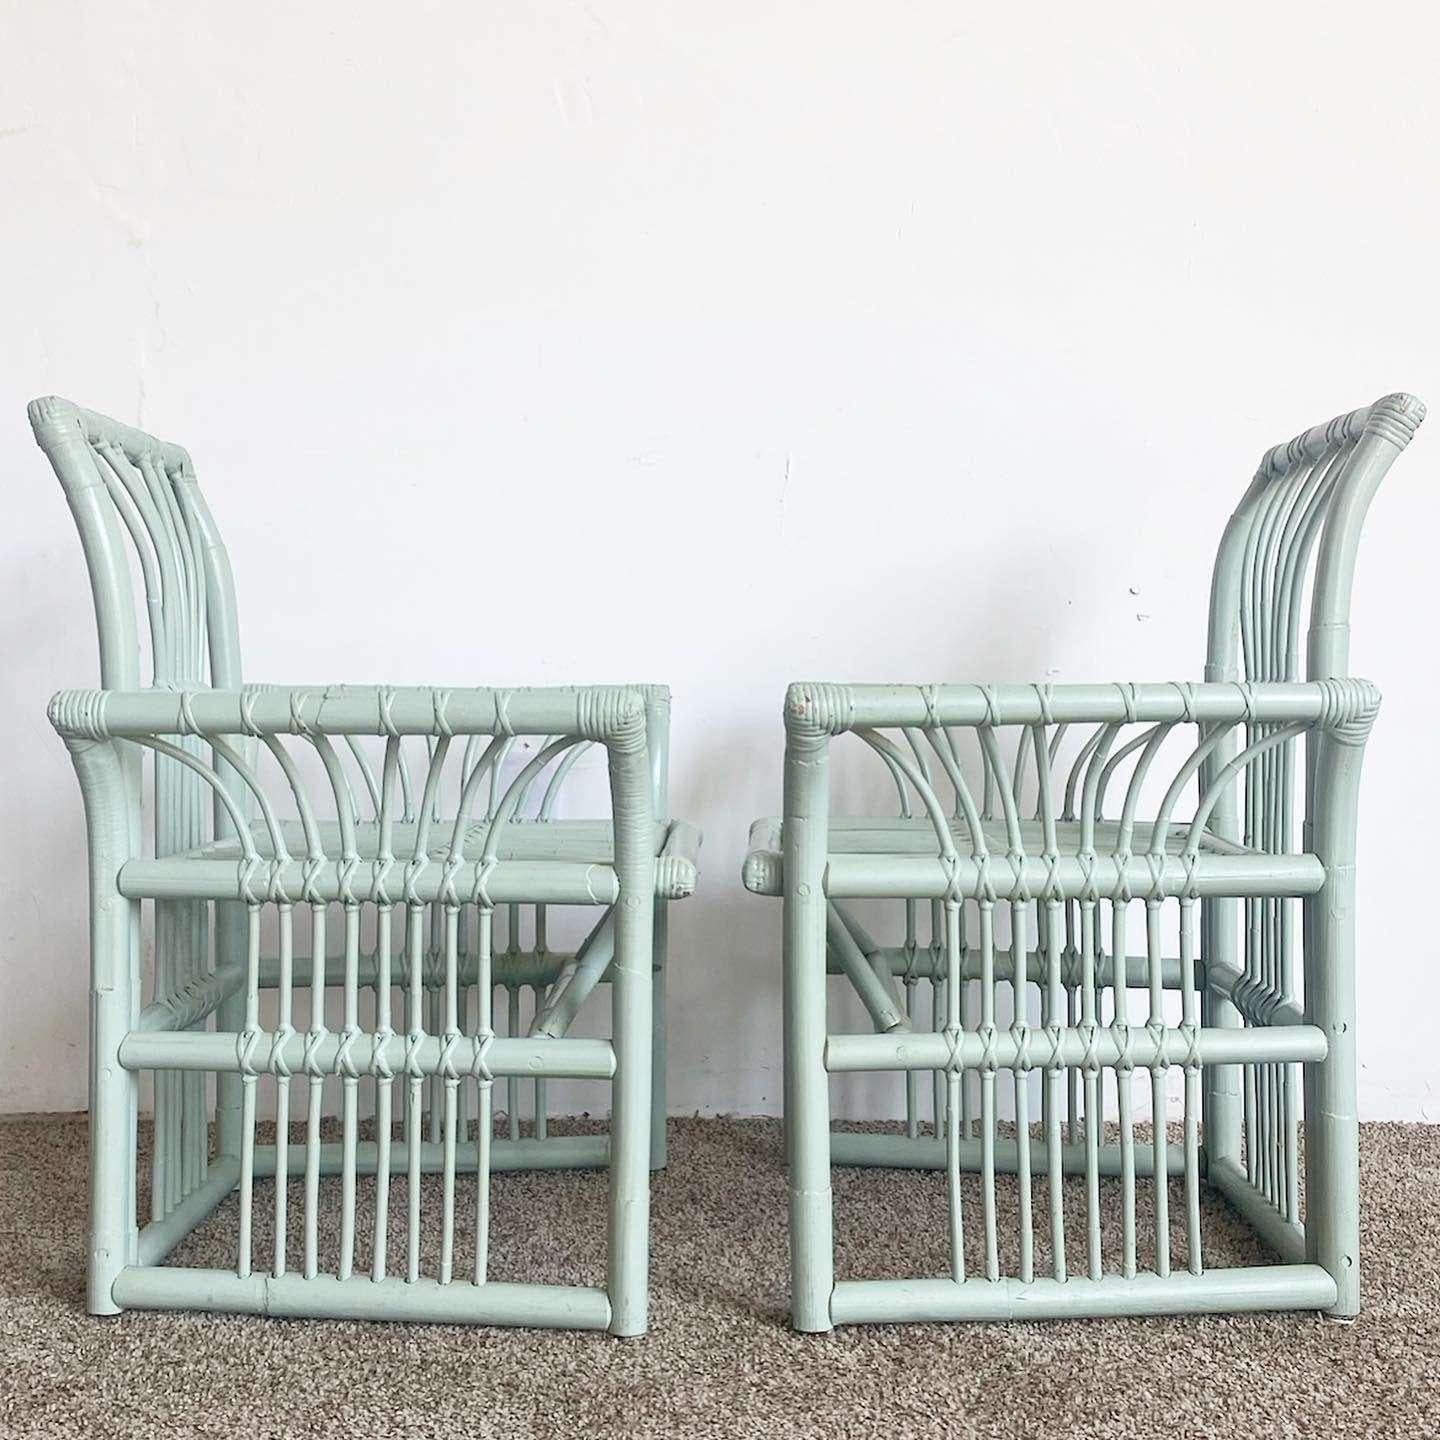 Boho Chic Mint Green Bamboo Rattan Dining Set - 5 Pieces In Good Condition For Sale In Delray Beach, FL